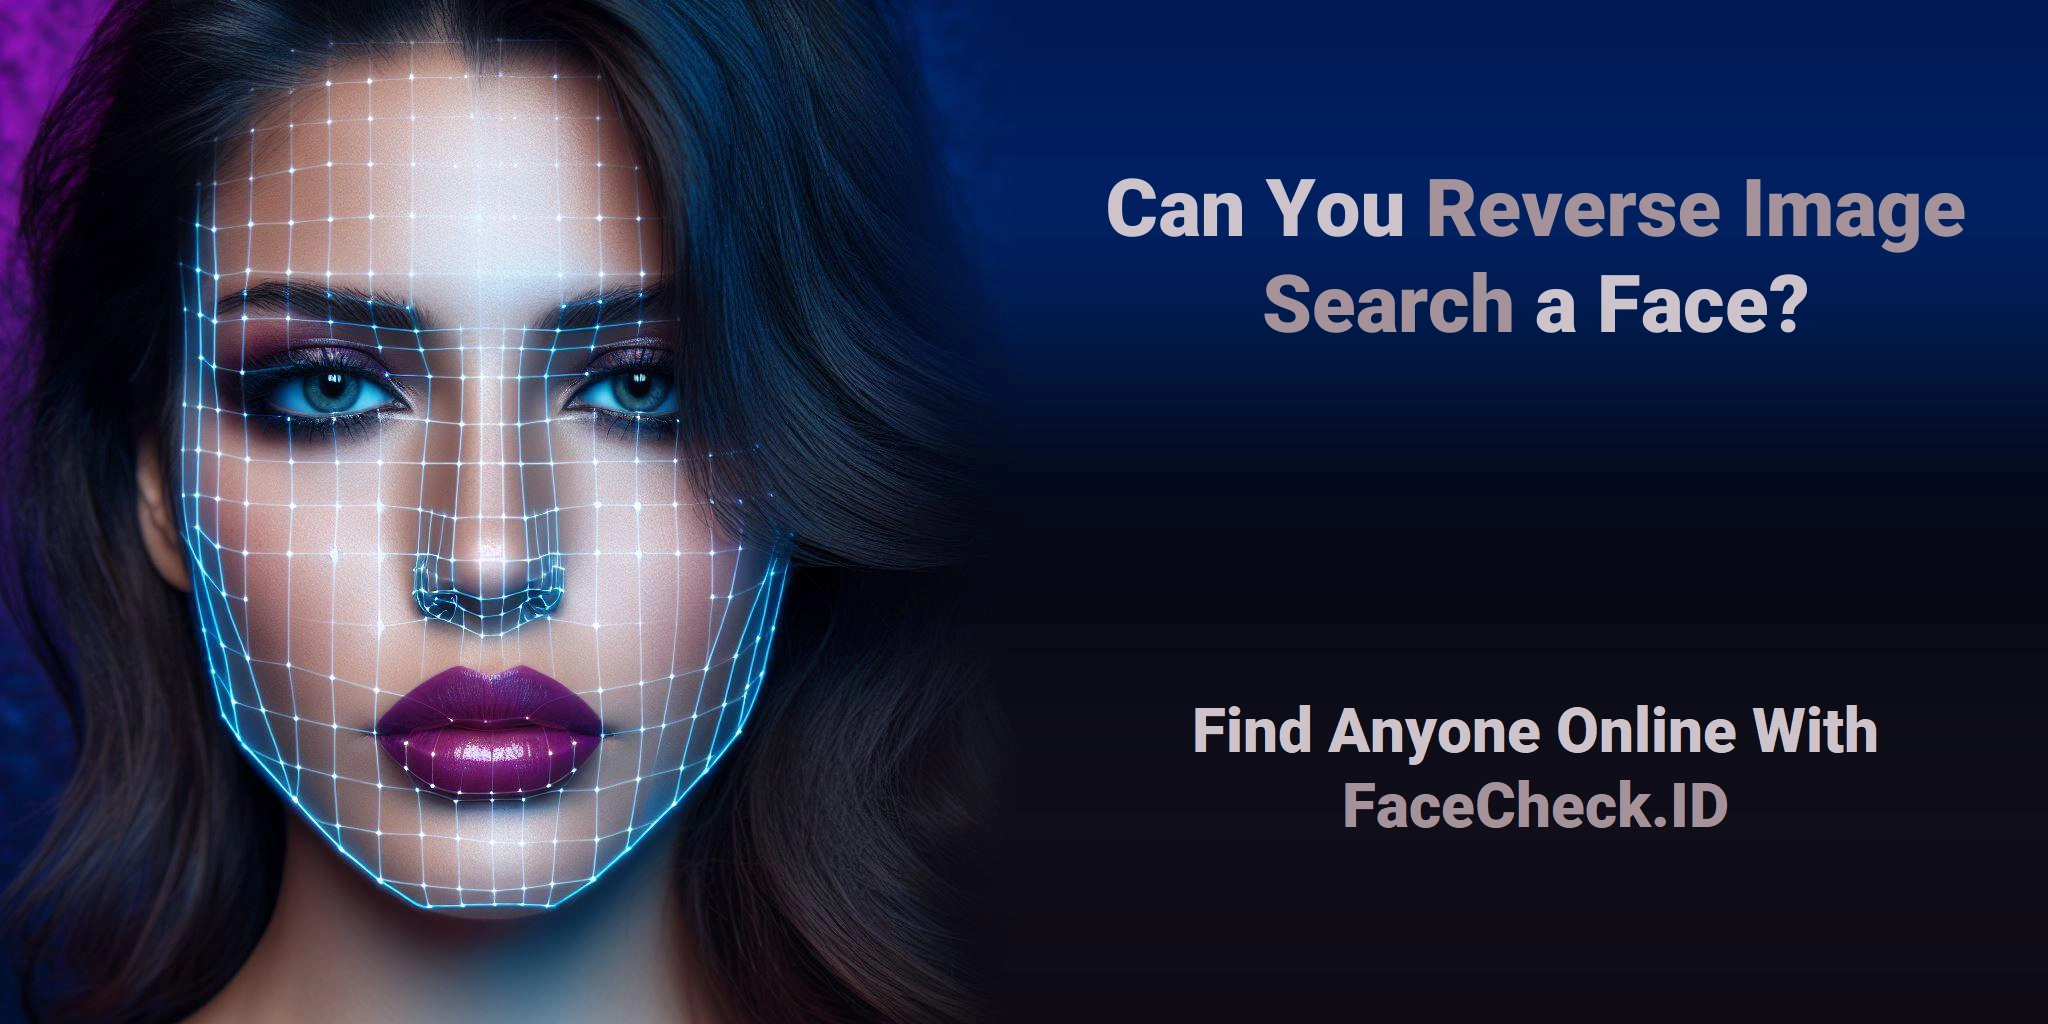 Can You Reverse Image Search a Face? Find Anyone Online With FaceCheck.ID